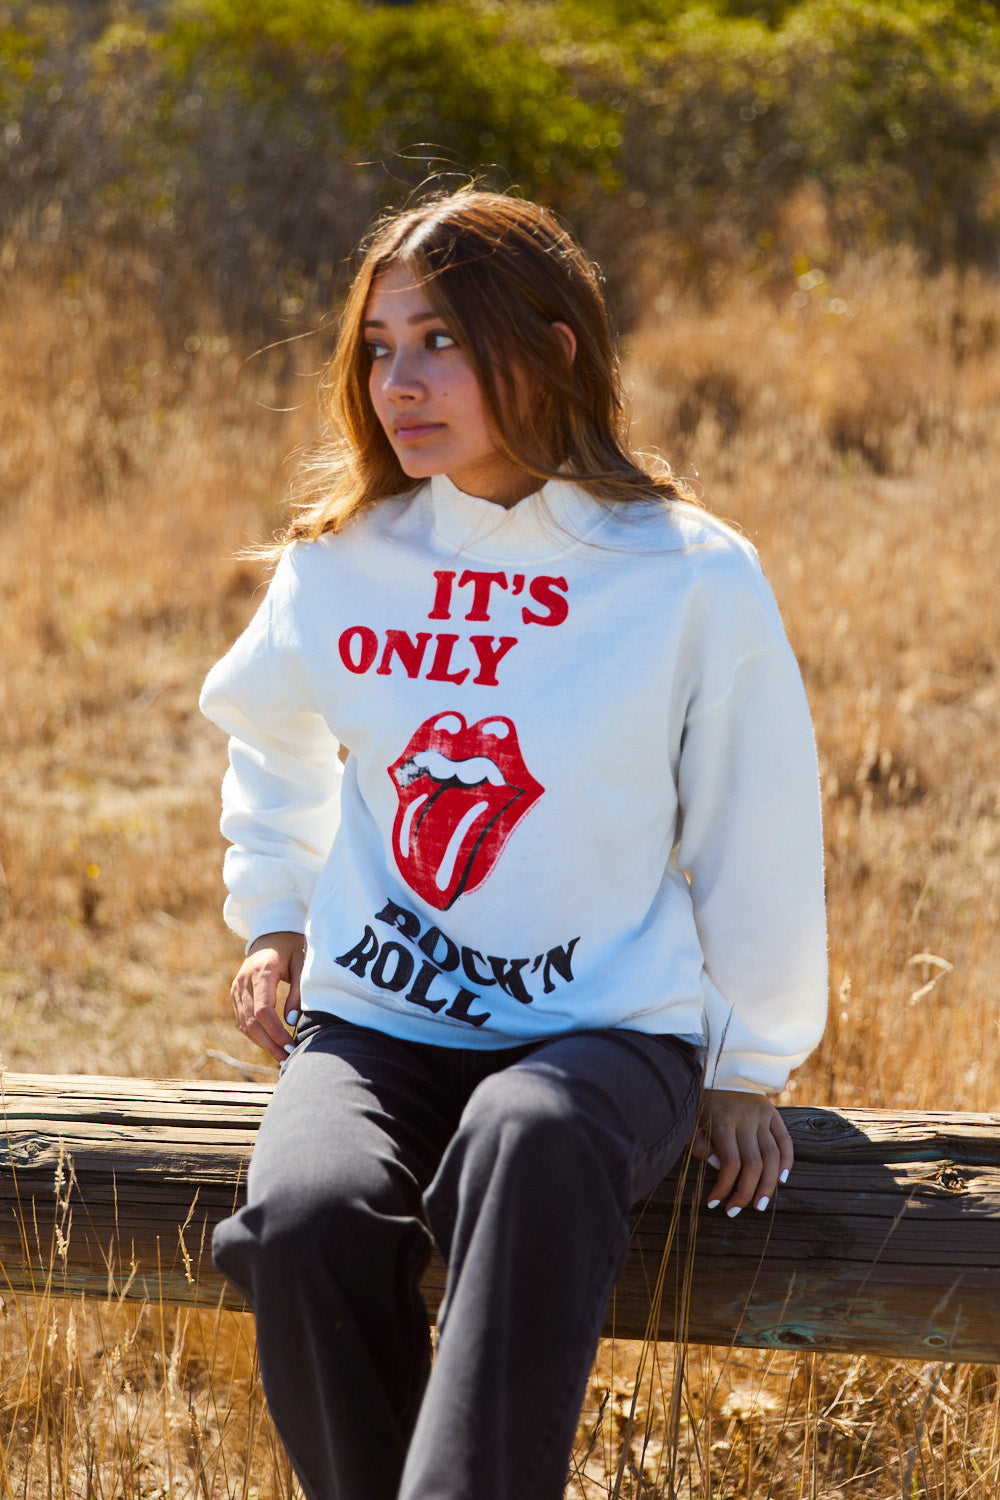 The Rolling Stones "It’s Only Rock N' Roll" Sweater